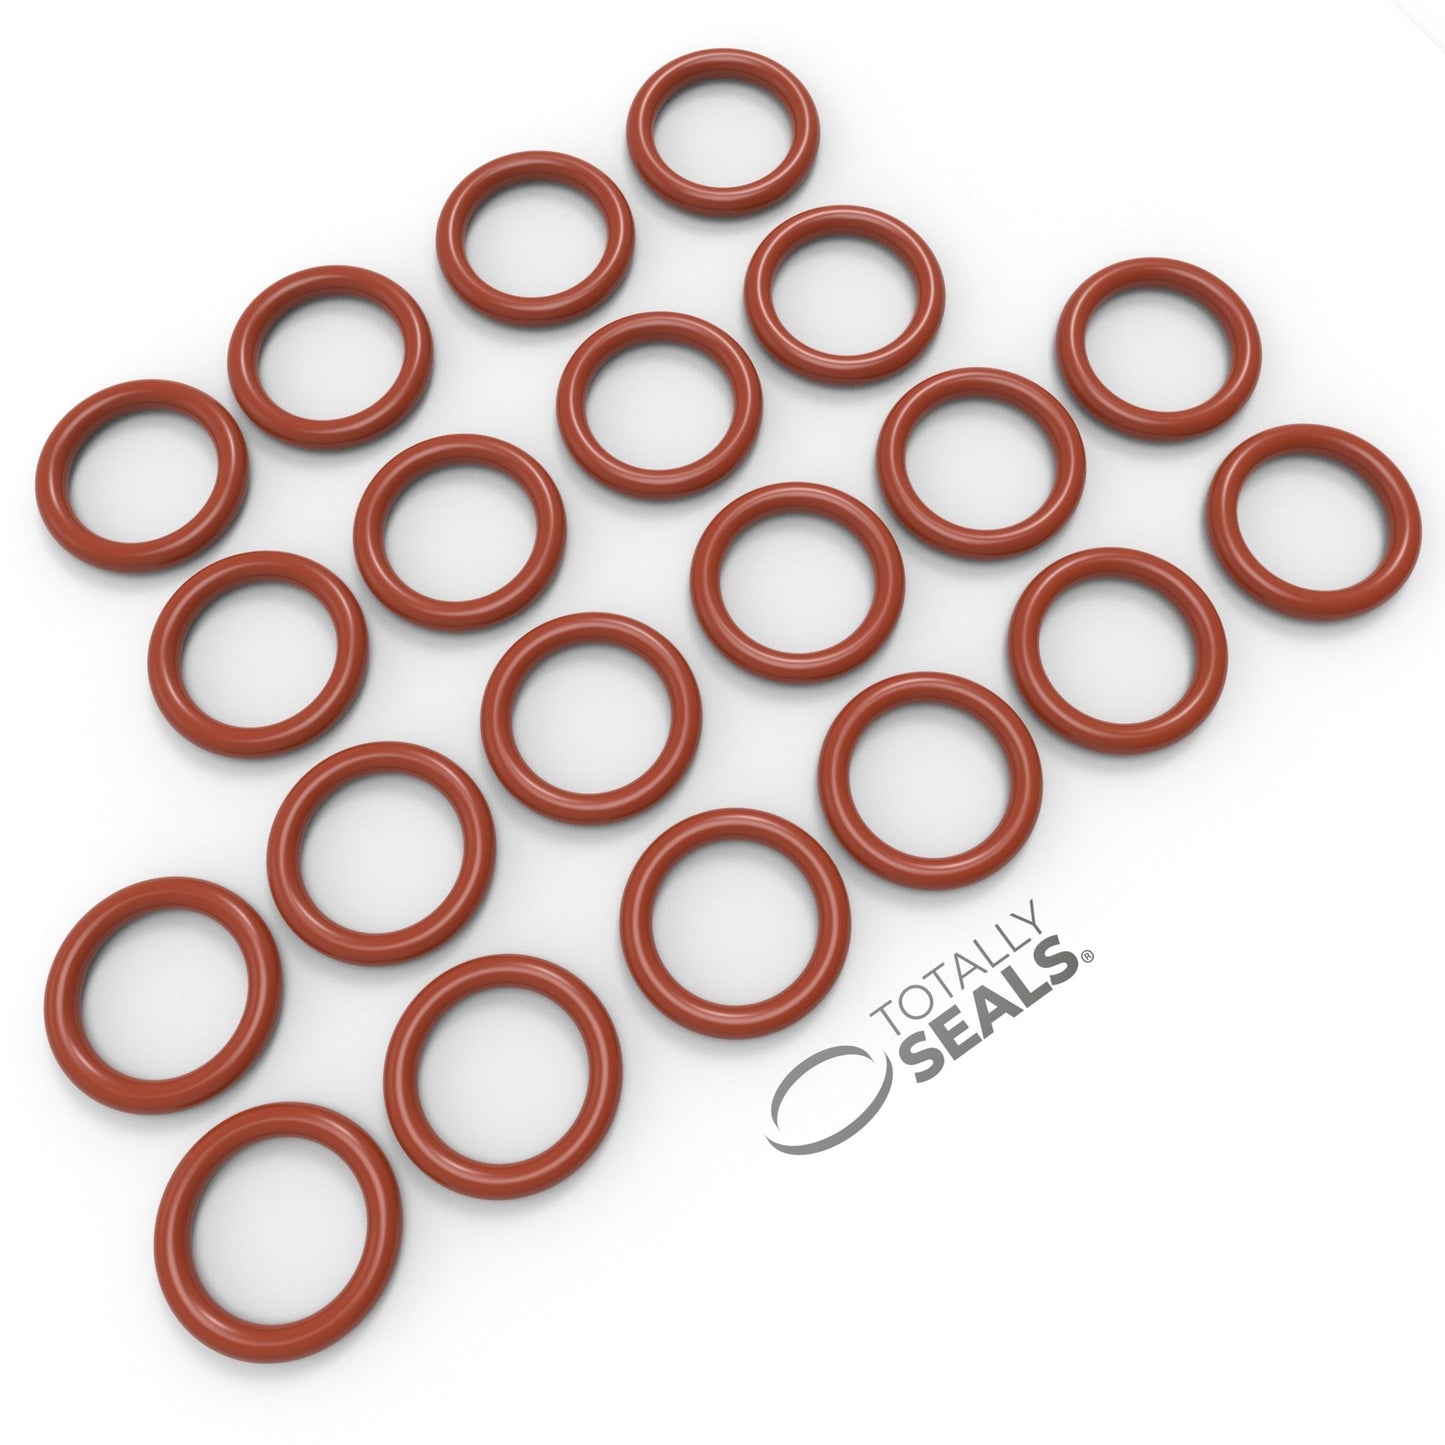 8mm x 2mm (12mm OD) Silicone O-Rings - Totally Seals®